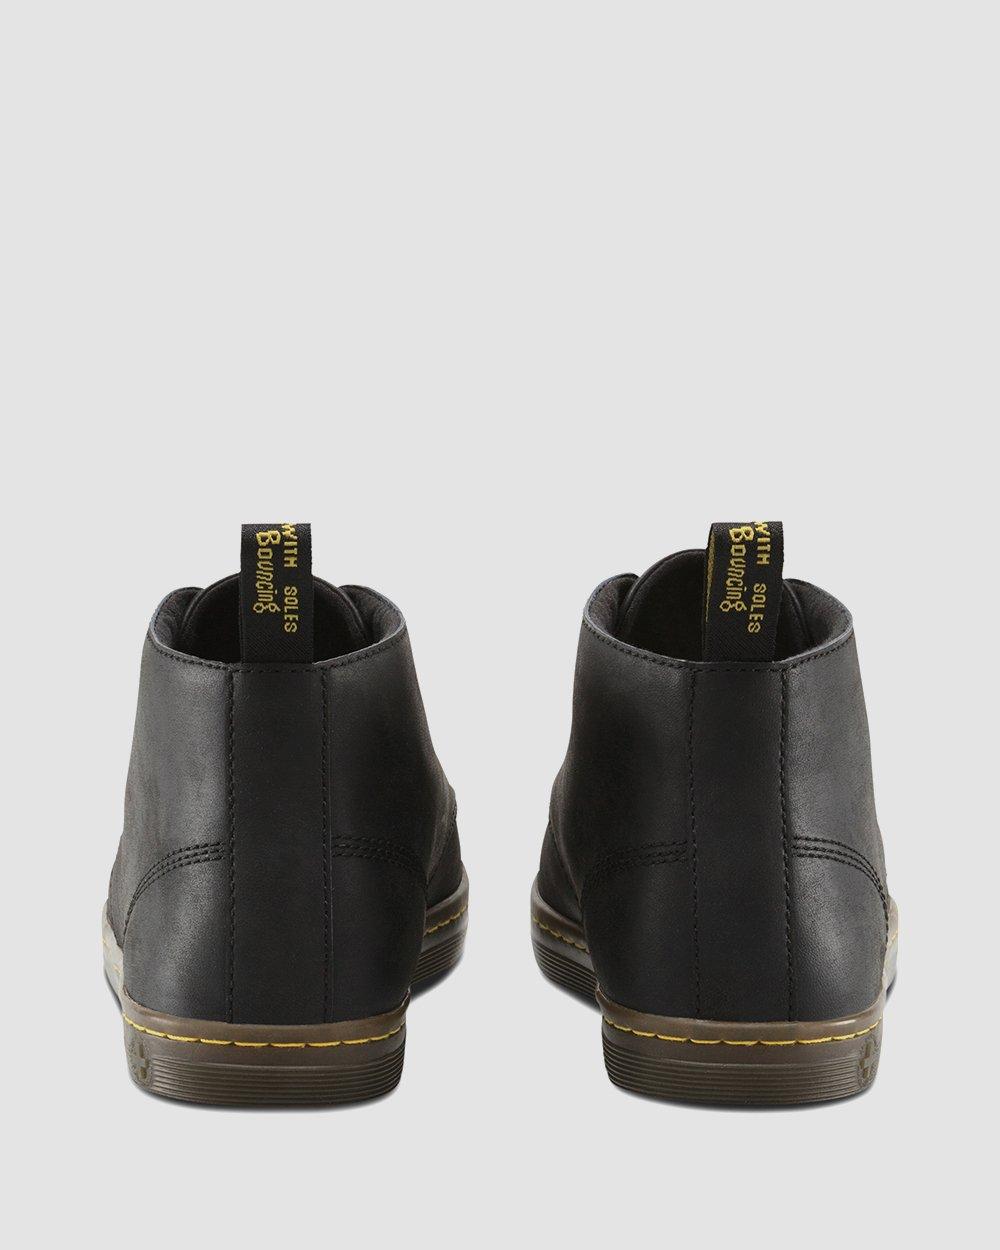 dr martens will